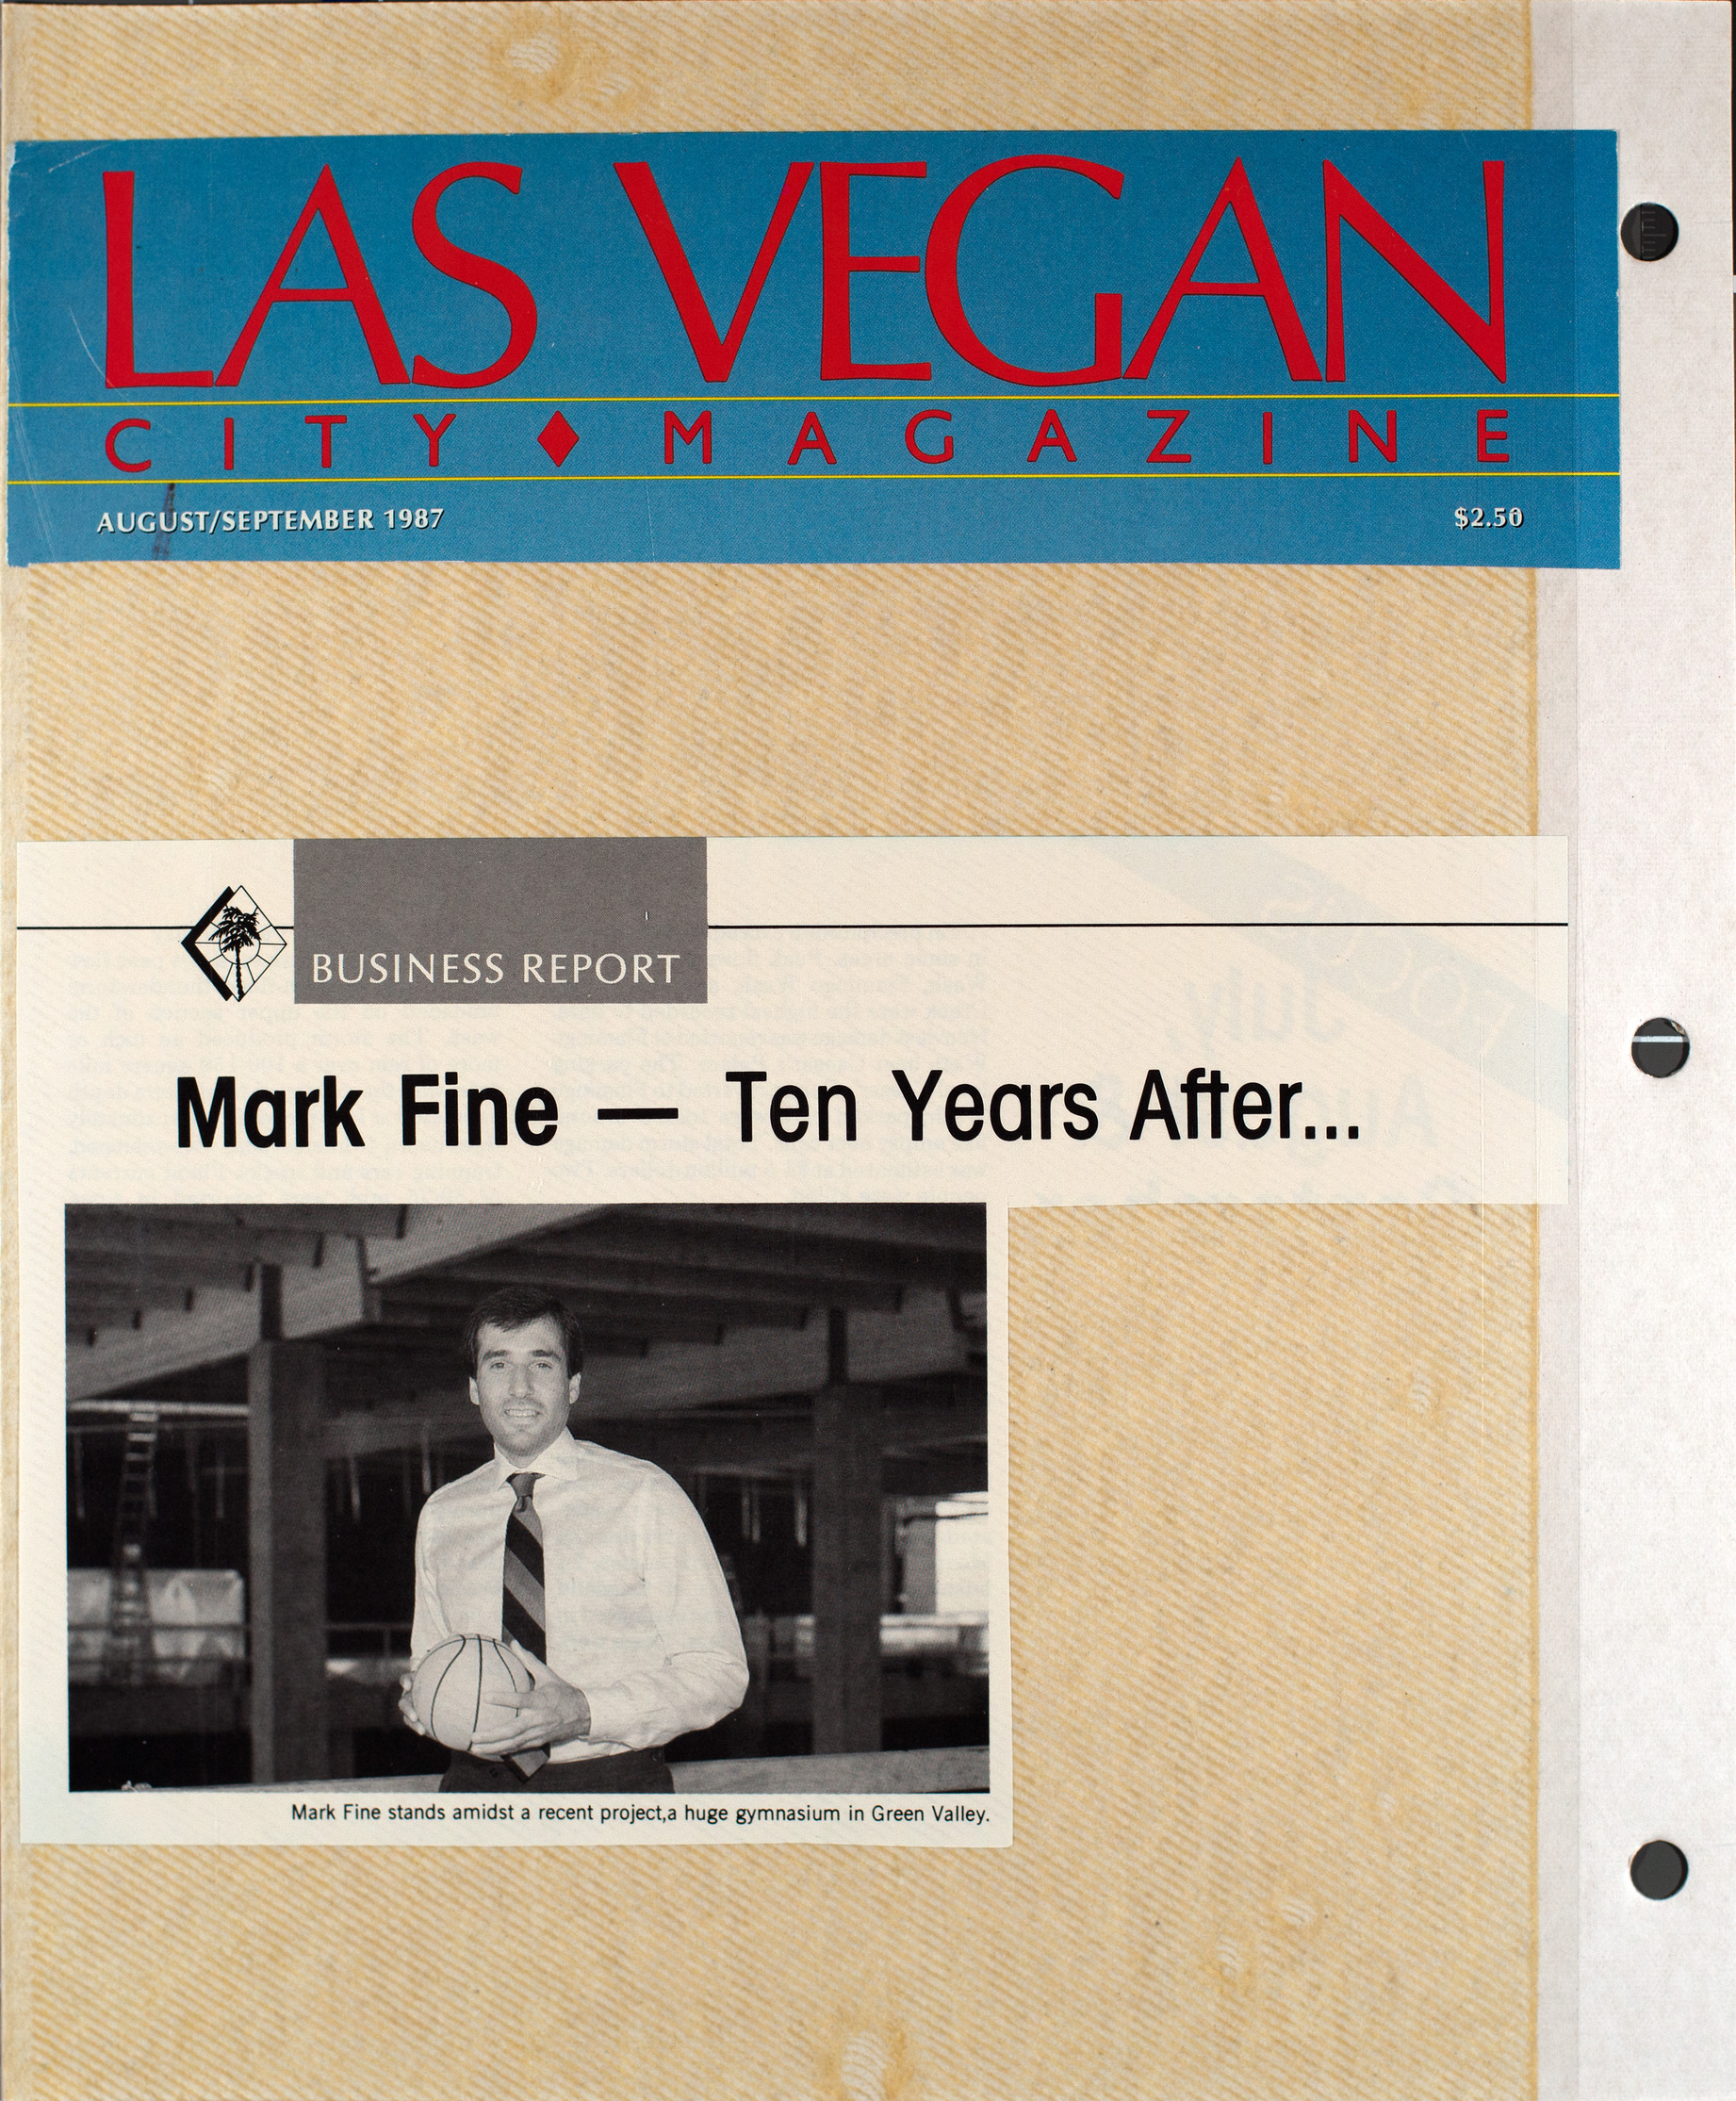 Clippings, Mark Fine - Ten years After, Las Vegan City Magazine, August-September 1987